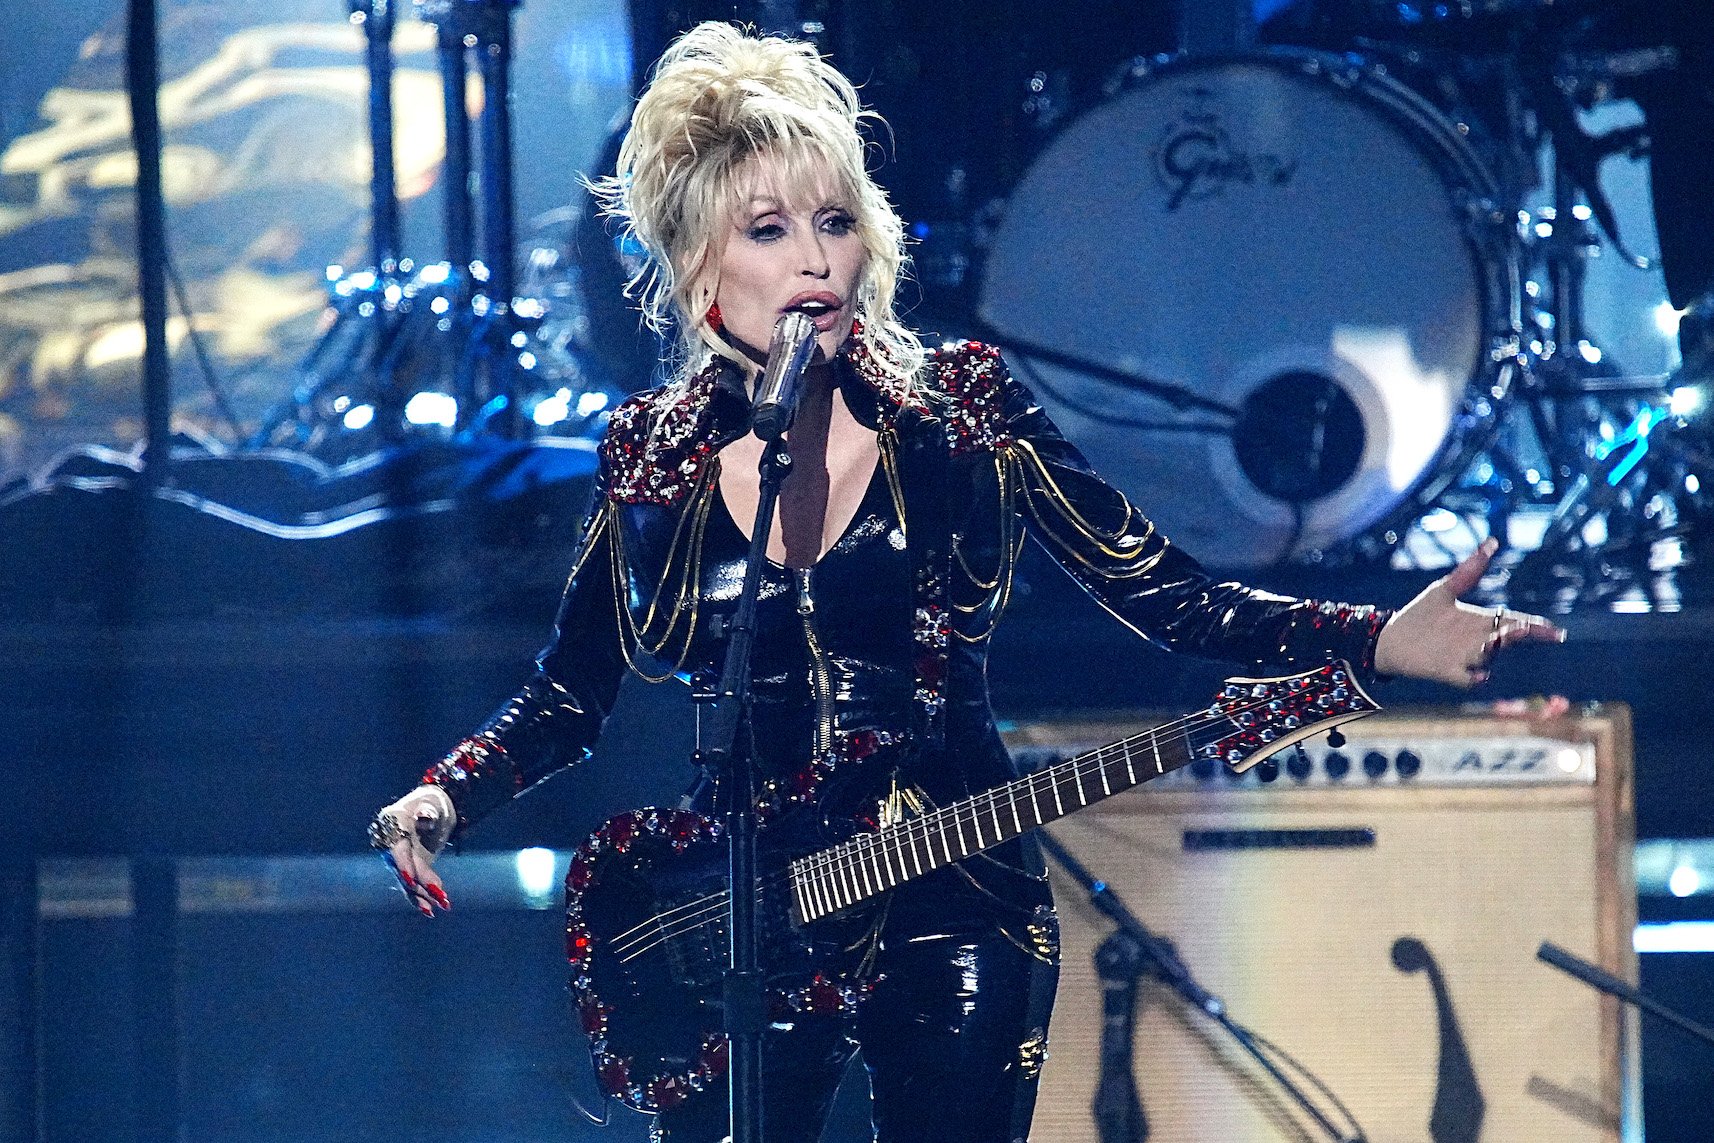 Dolly Parton Reveals 3 Rock Legends Who Made Her Starstruck: ‘It’s Just Such a Thrill’